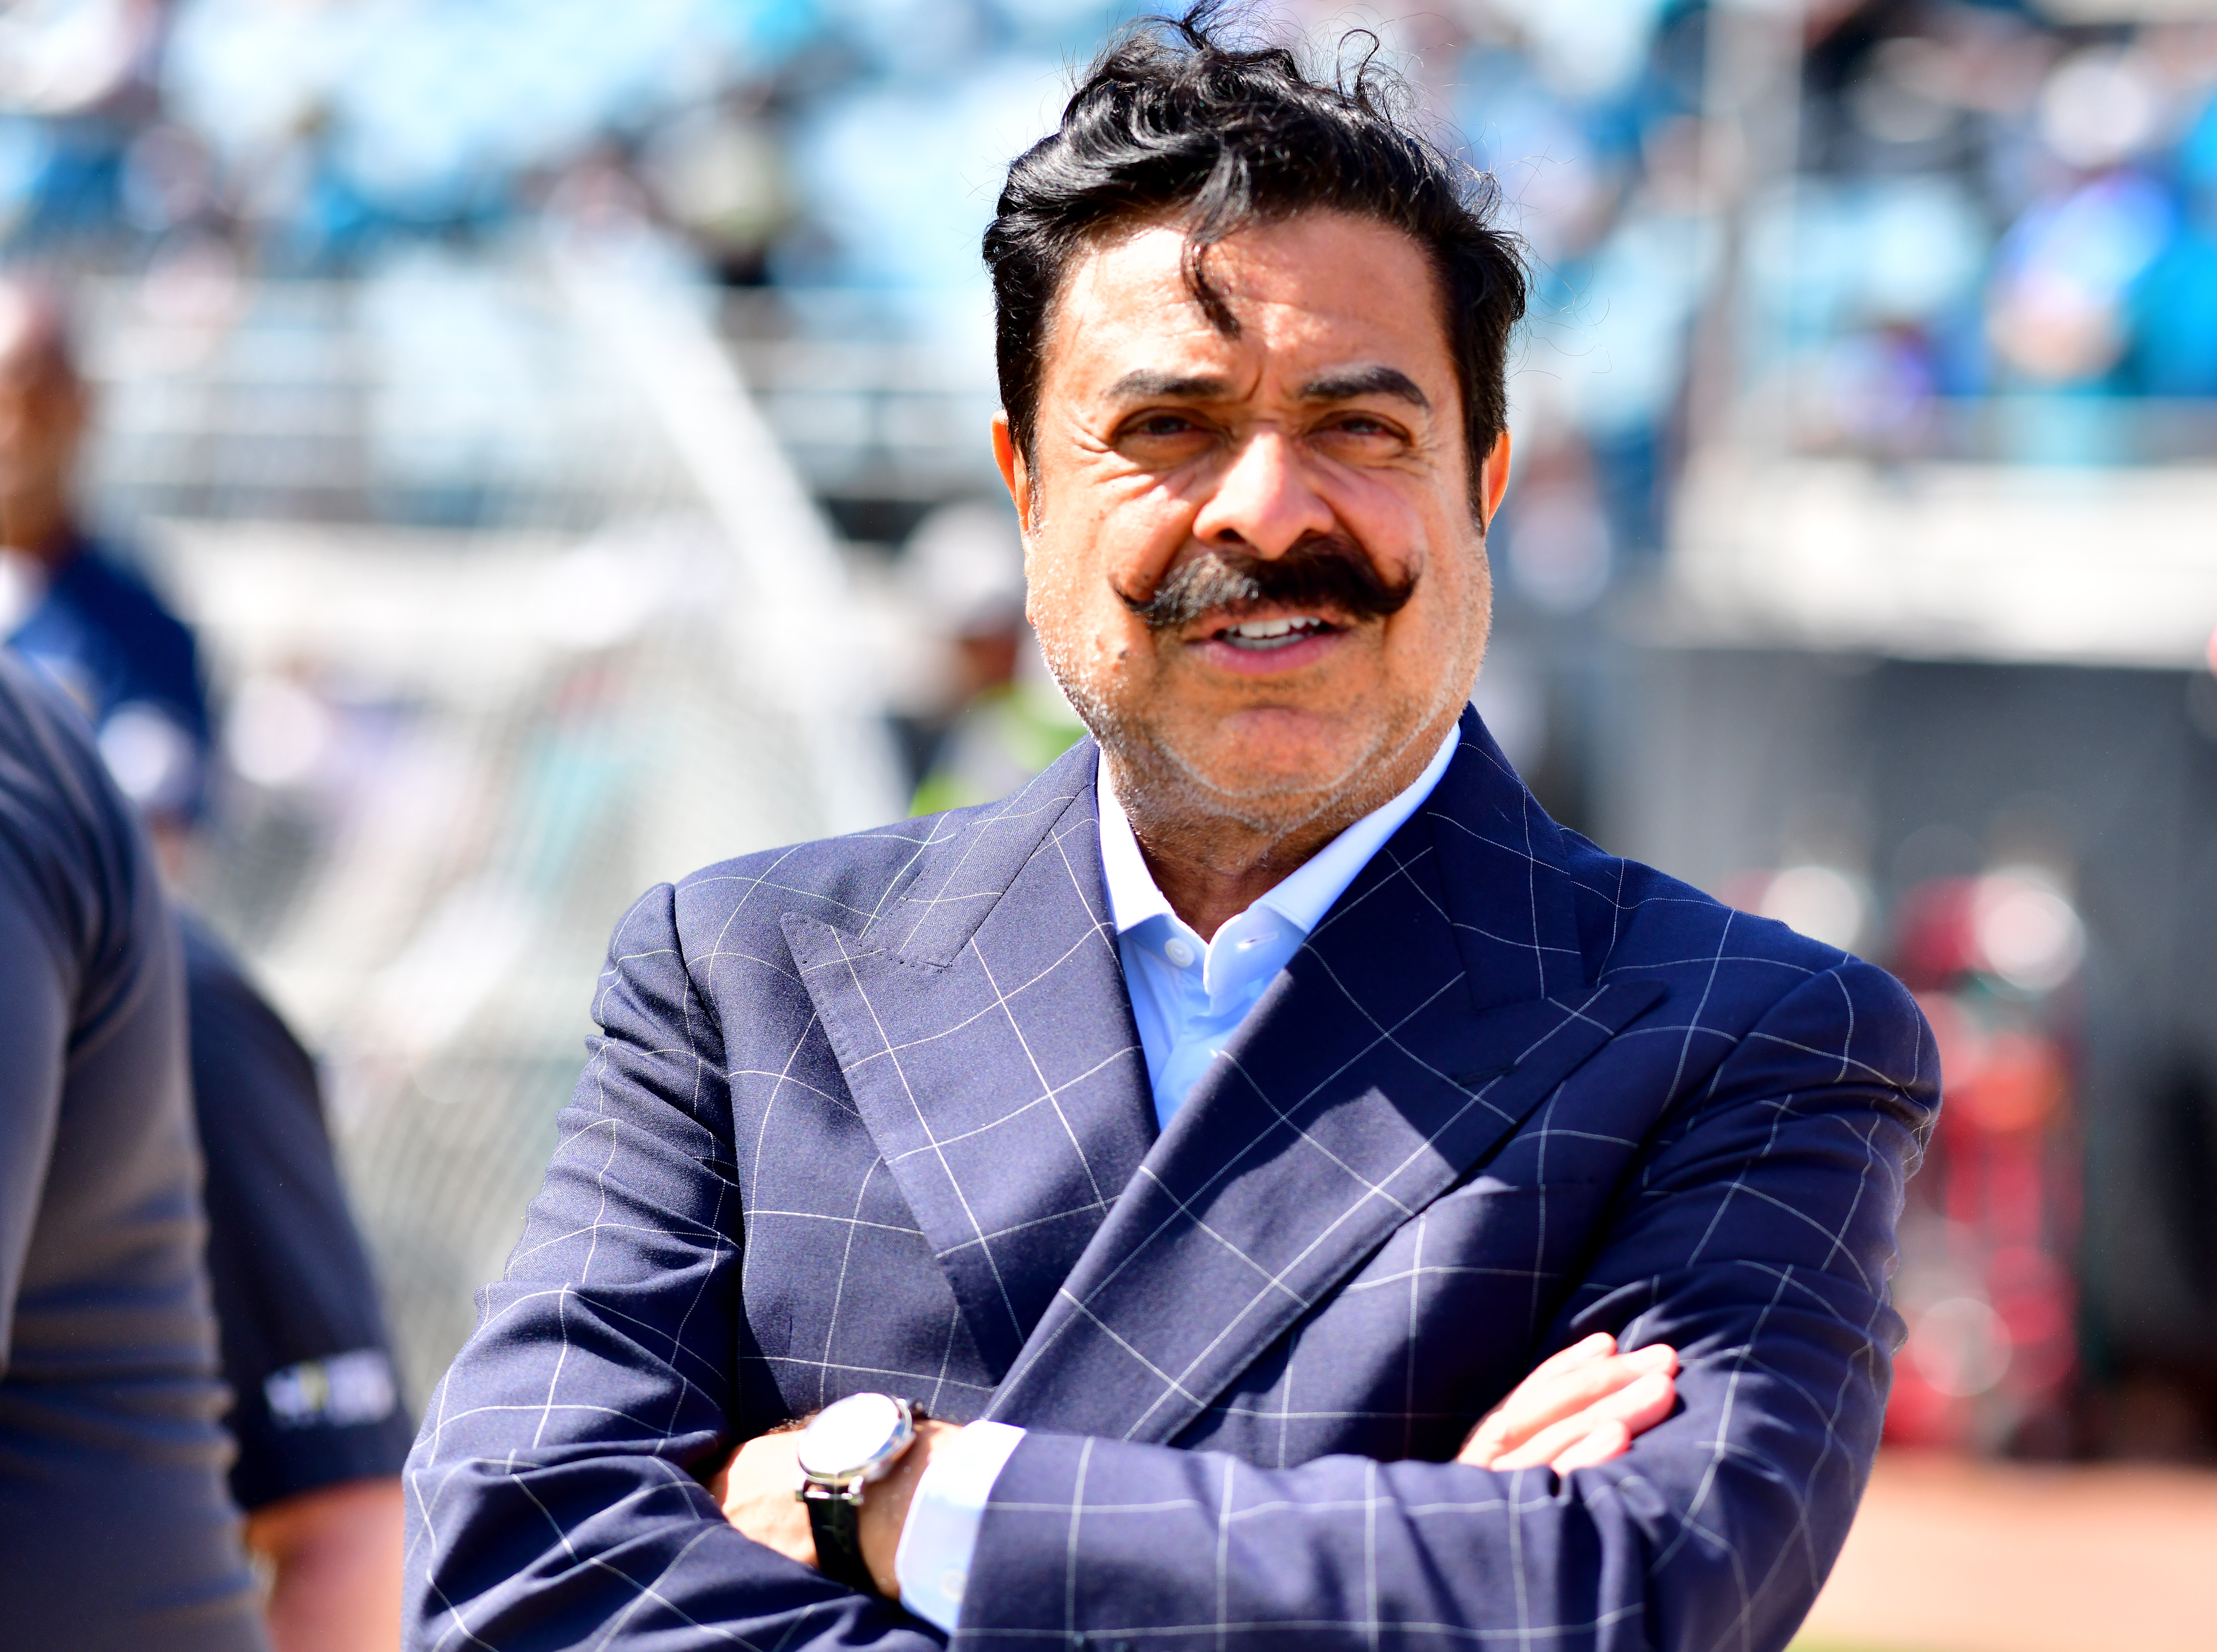 Jaguars Owner Shahid Khan’s $200 Million Superyacht Can Host 270 Guests for a Party